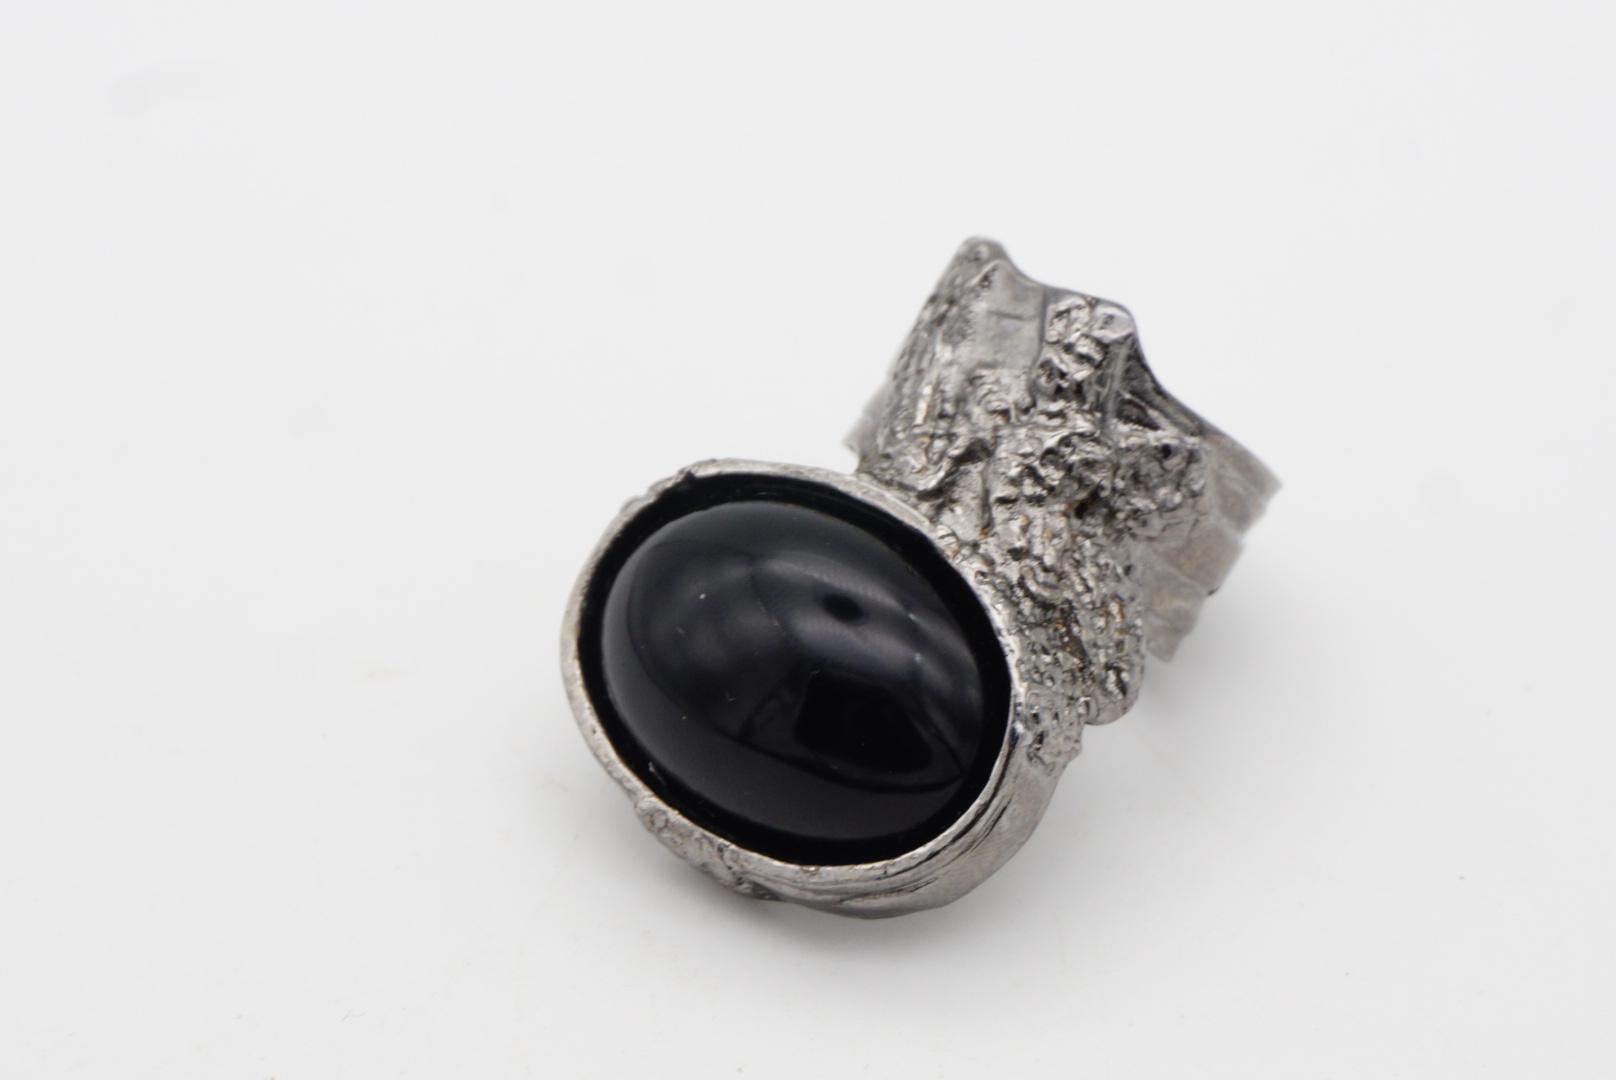 Yves Saint Laurent YSL Arty Black Chunky Statement Cabochon Silver Ring Size 8 For Sale 5